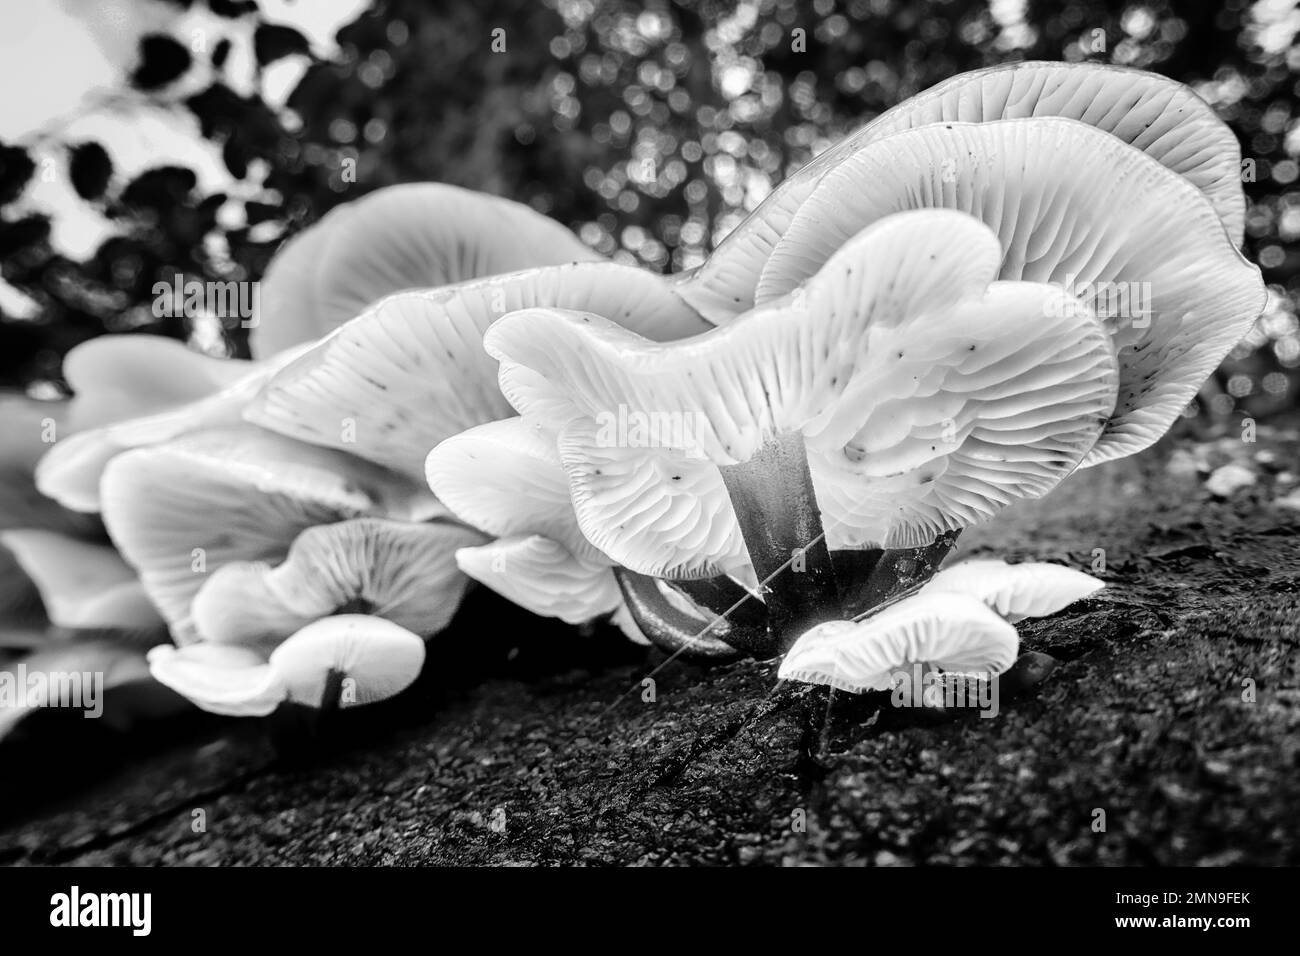 Stunning group of edible Velvet shank fungus Flammulina velutipes growing on dead wood of a tree stump with view of gills in black and white. UK Stock Photo